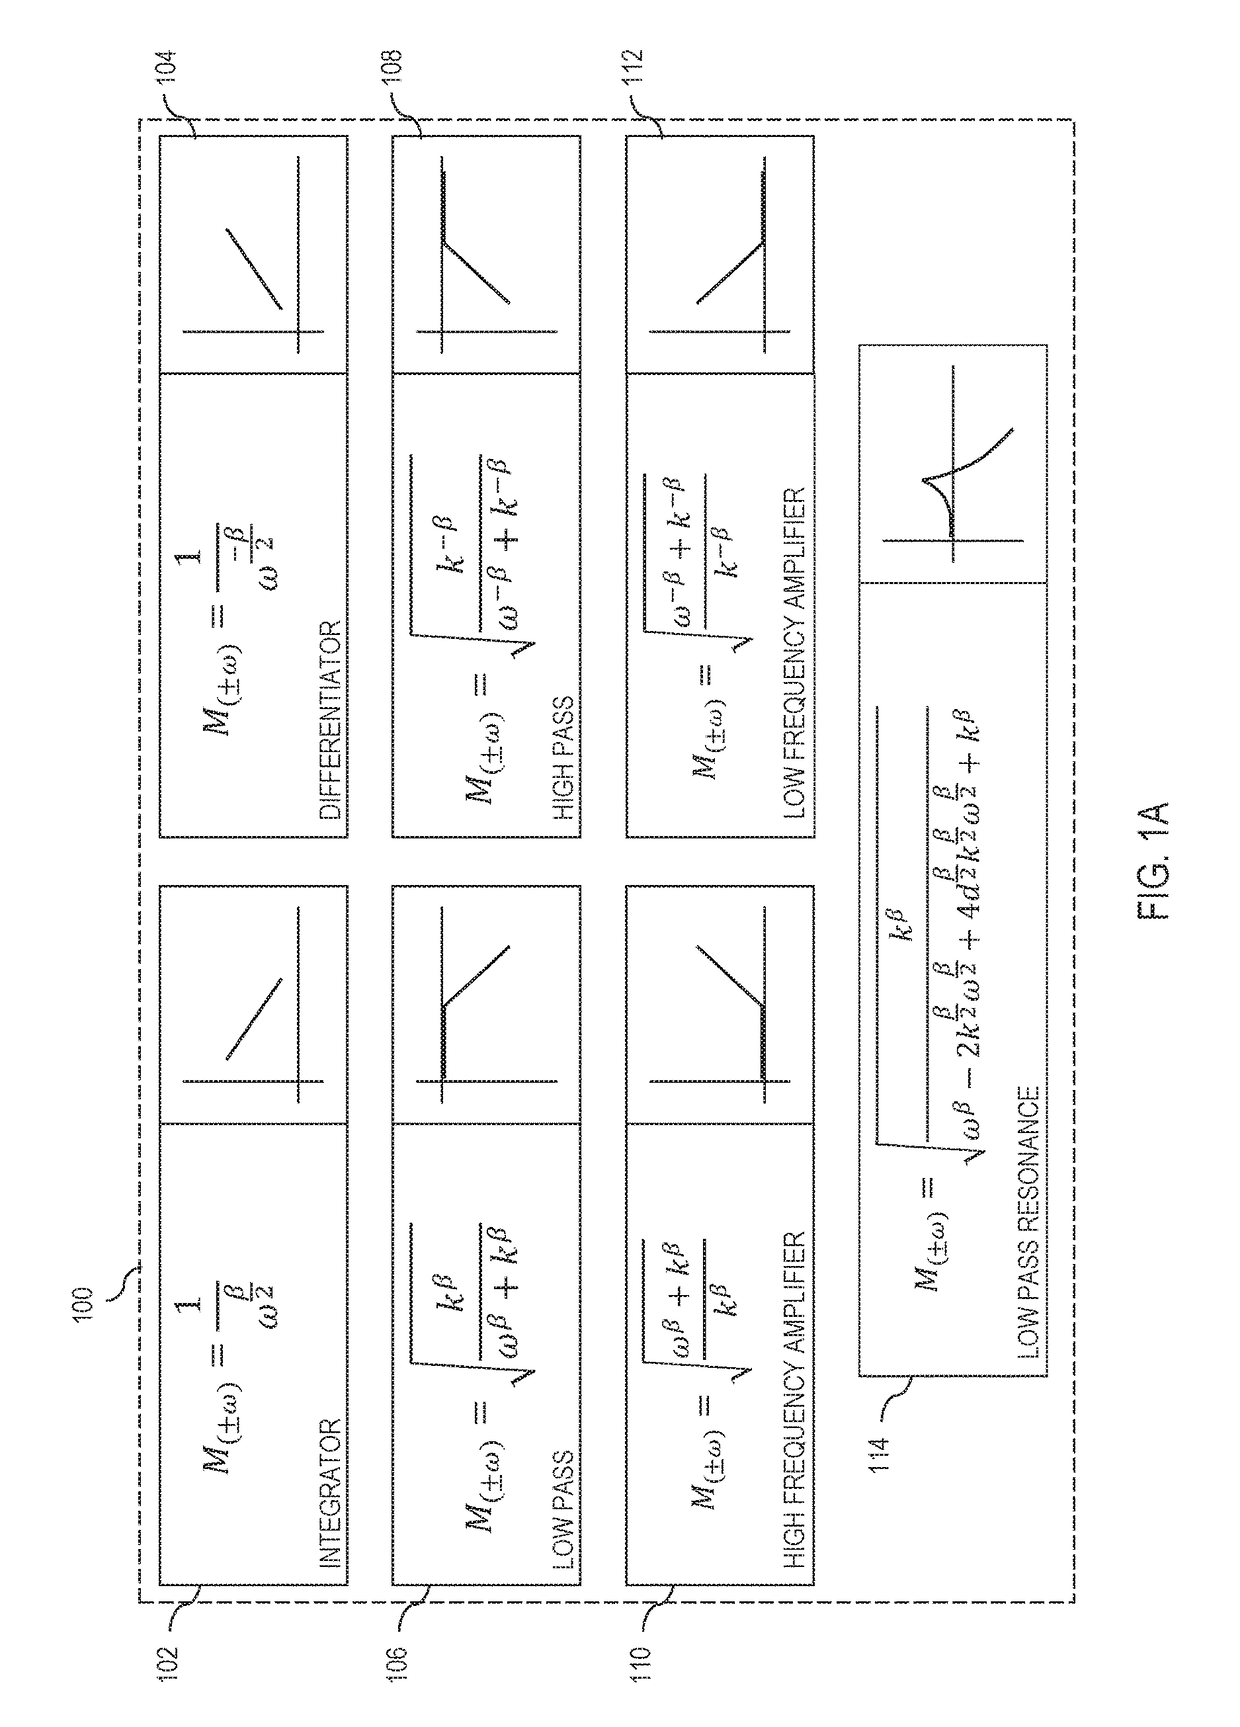 Fractional scaling digital signal processing